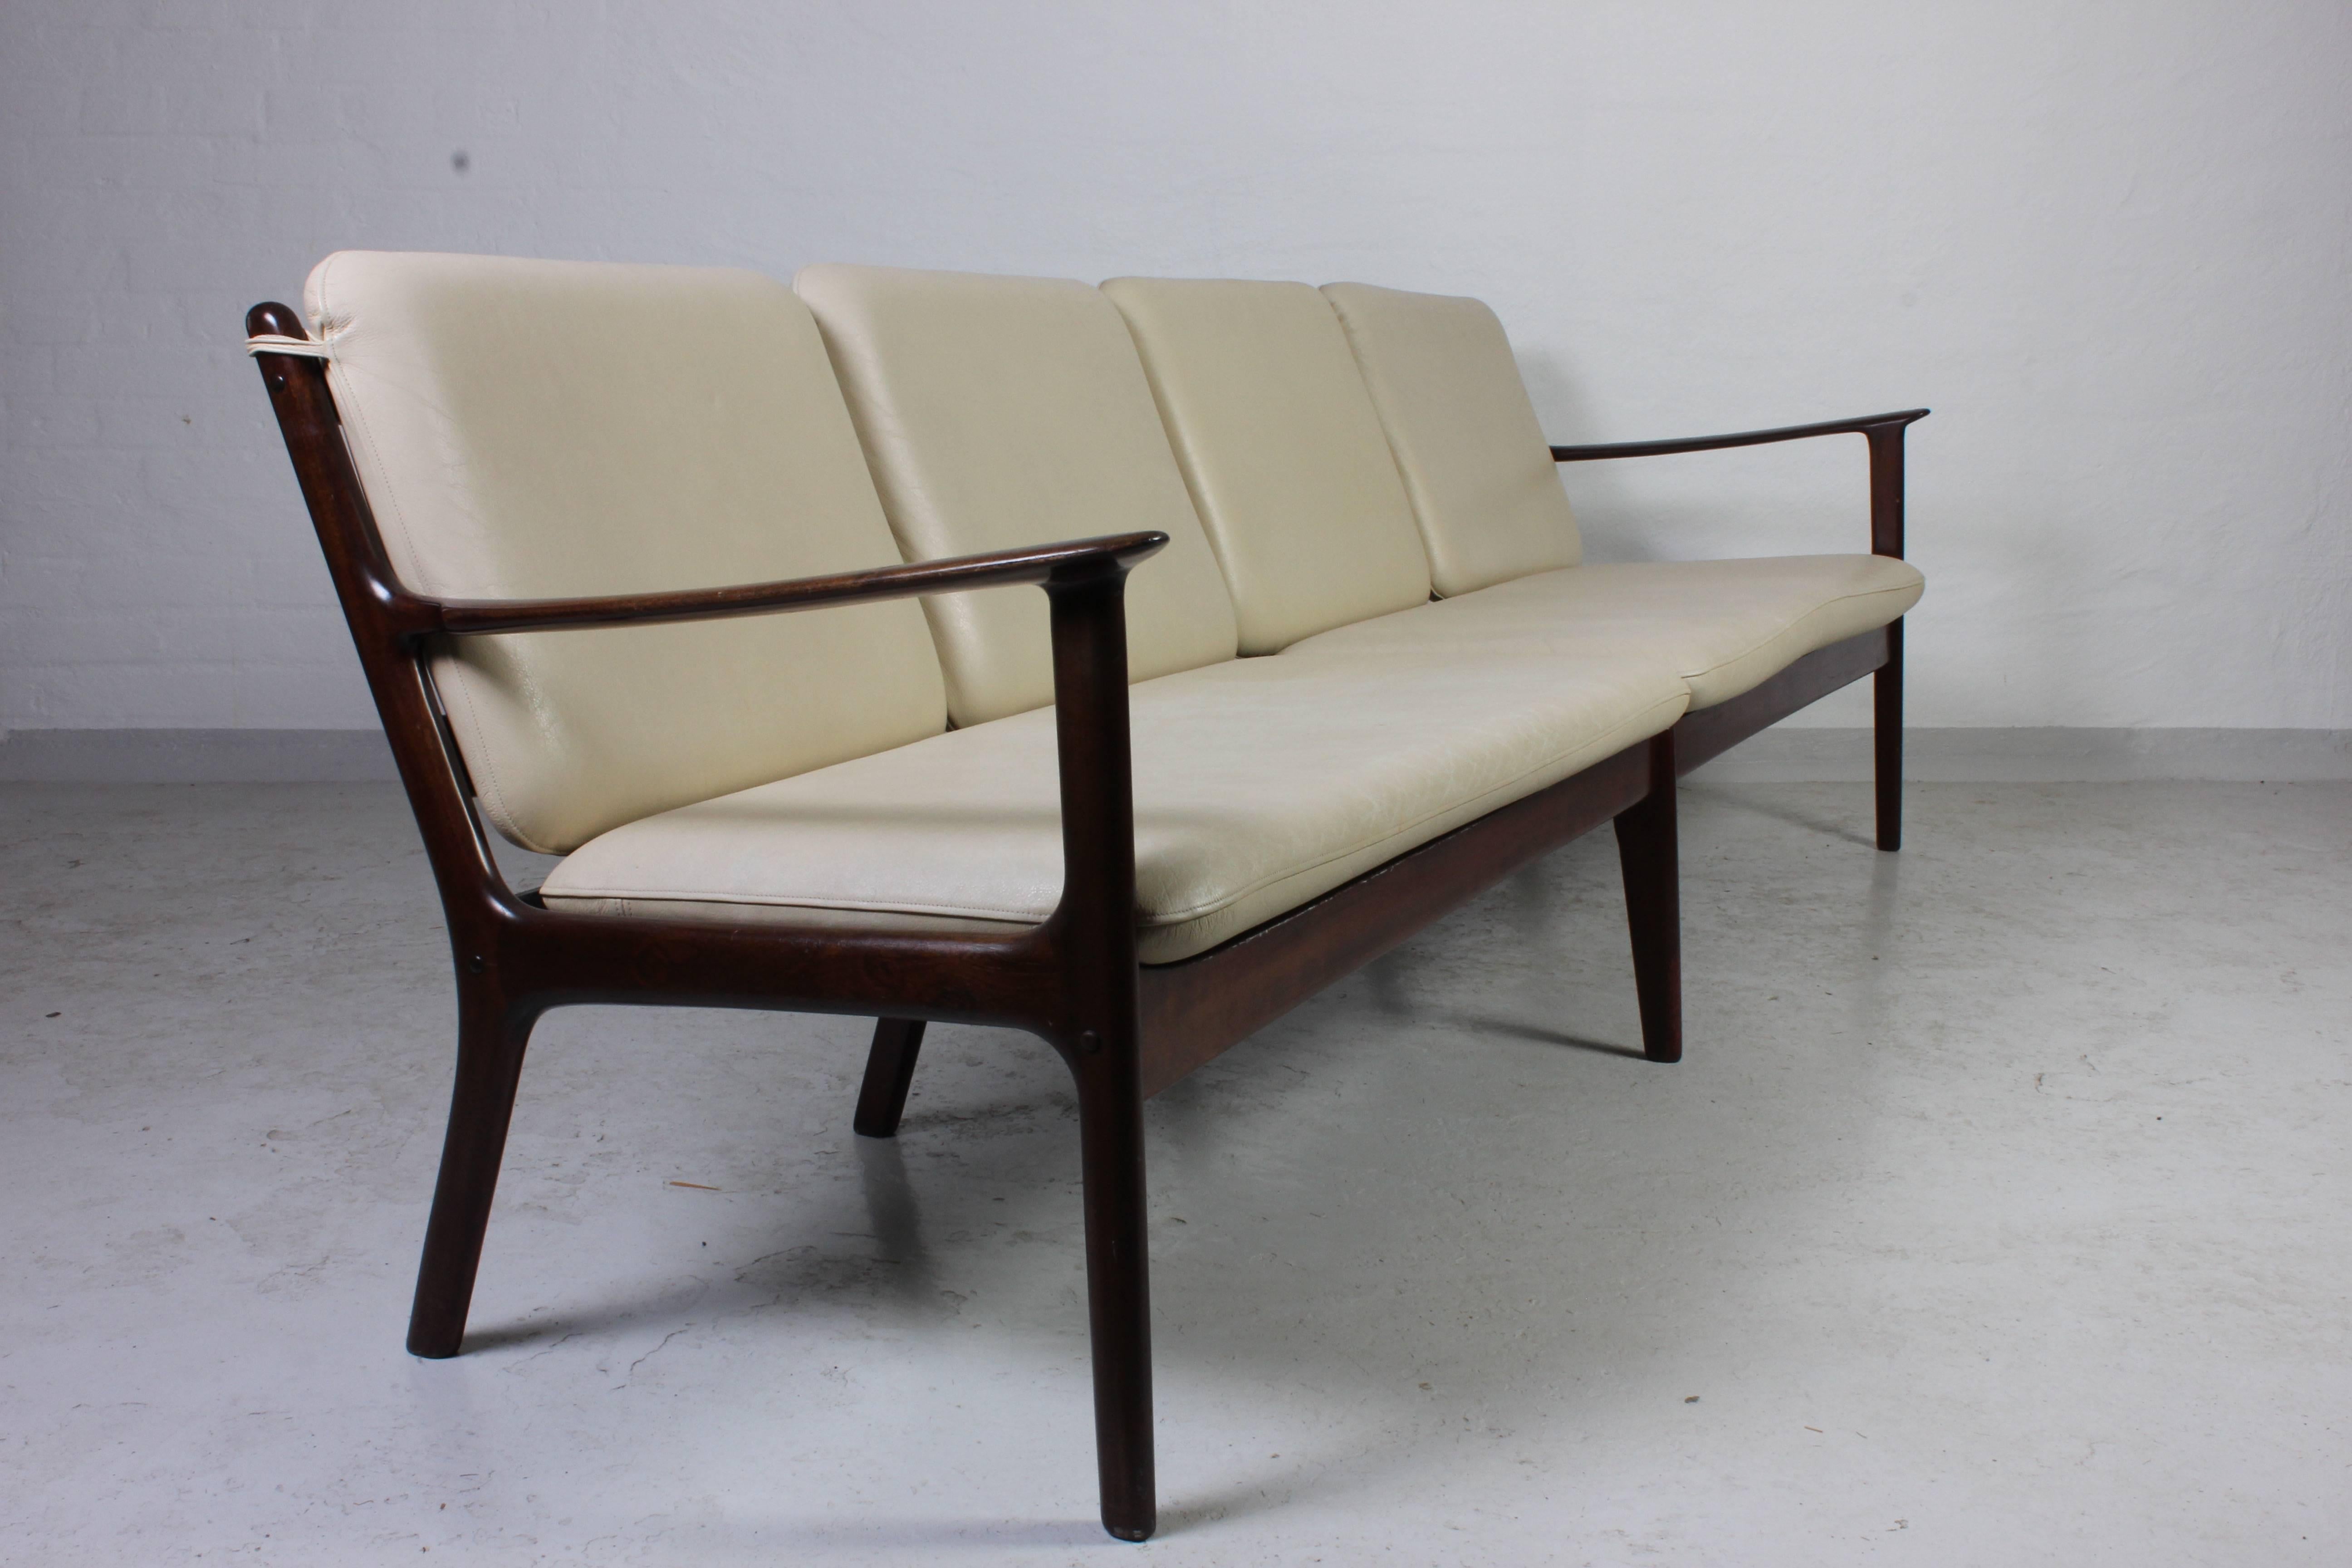 Danish Ole Wanscher Mahogany PJ112 Four-Seat Sofa and Lounge Chair for Poul Jeppesen